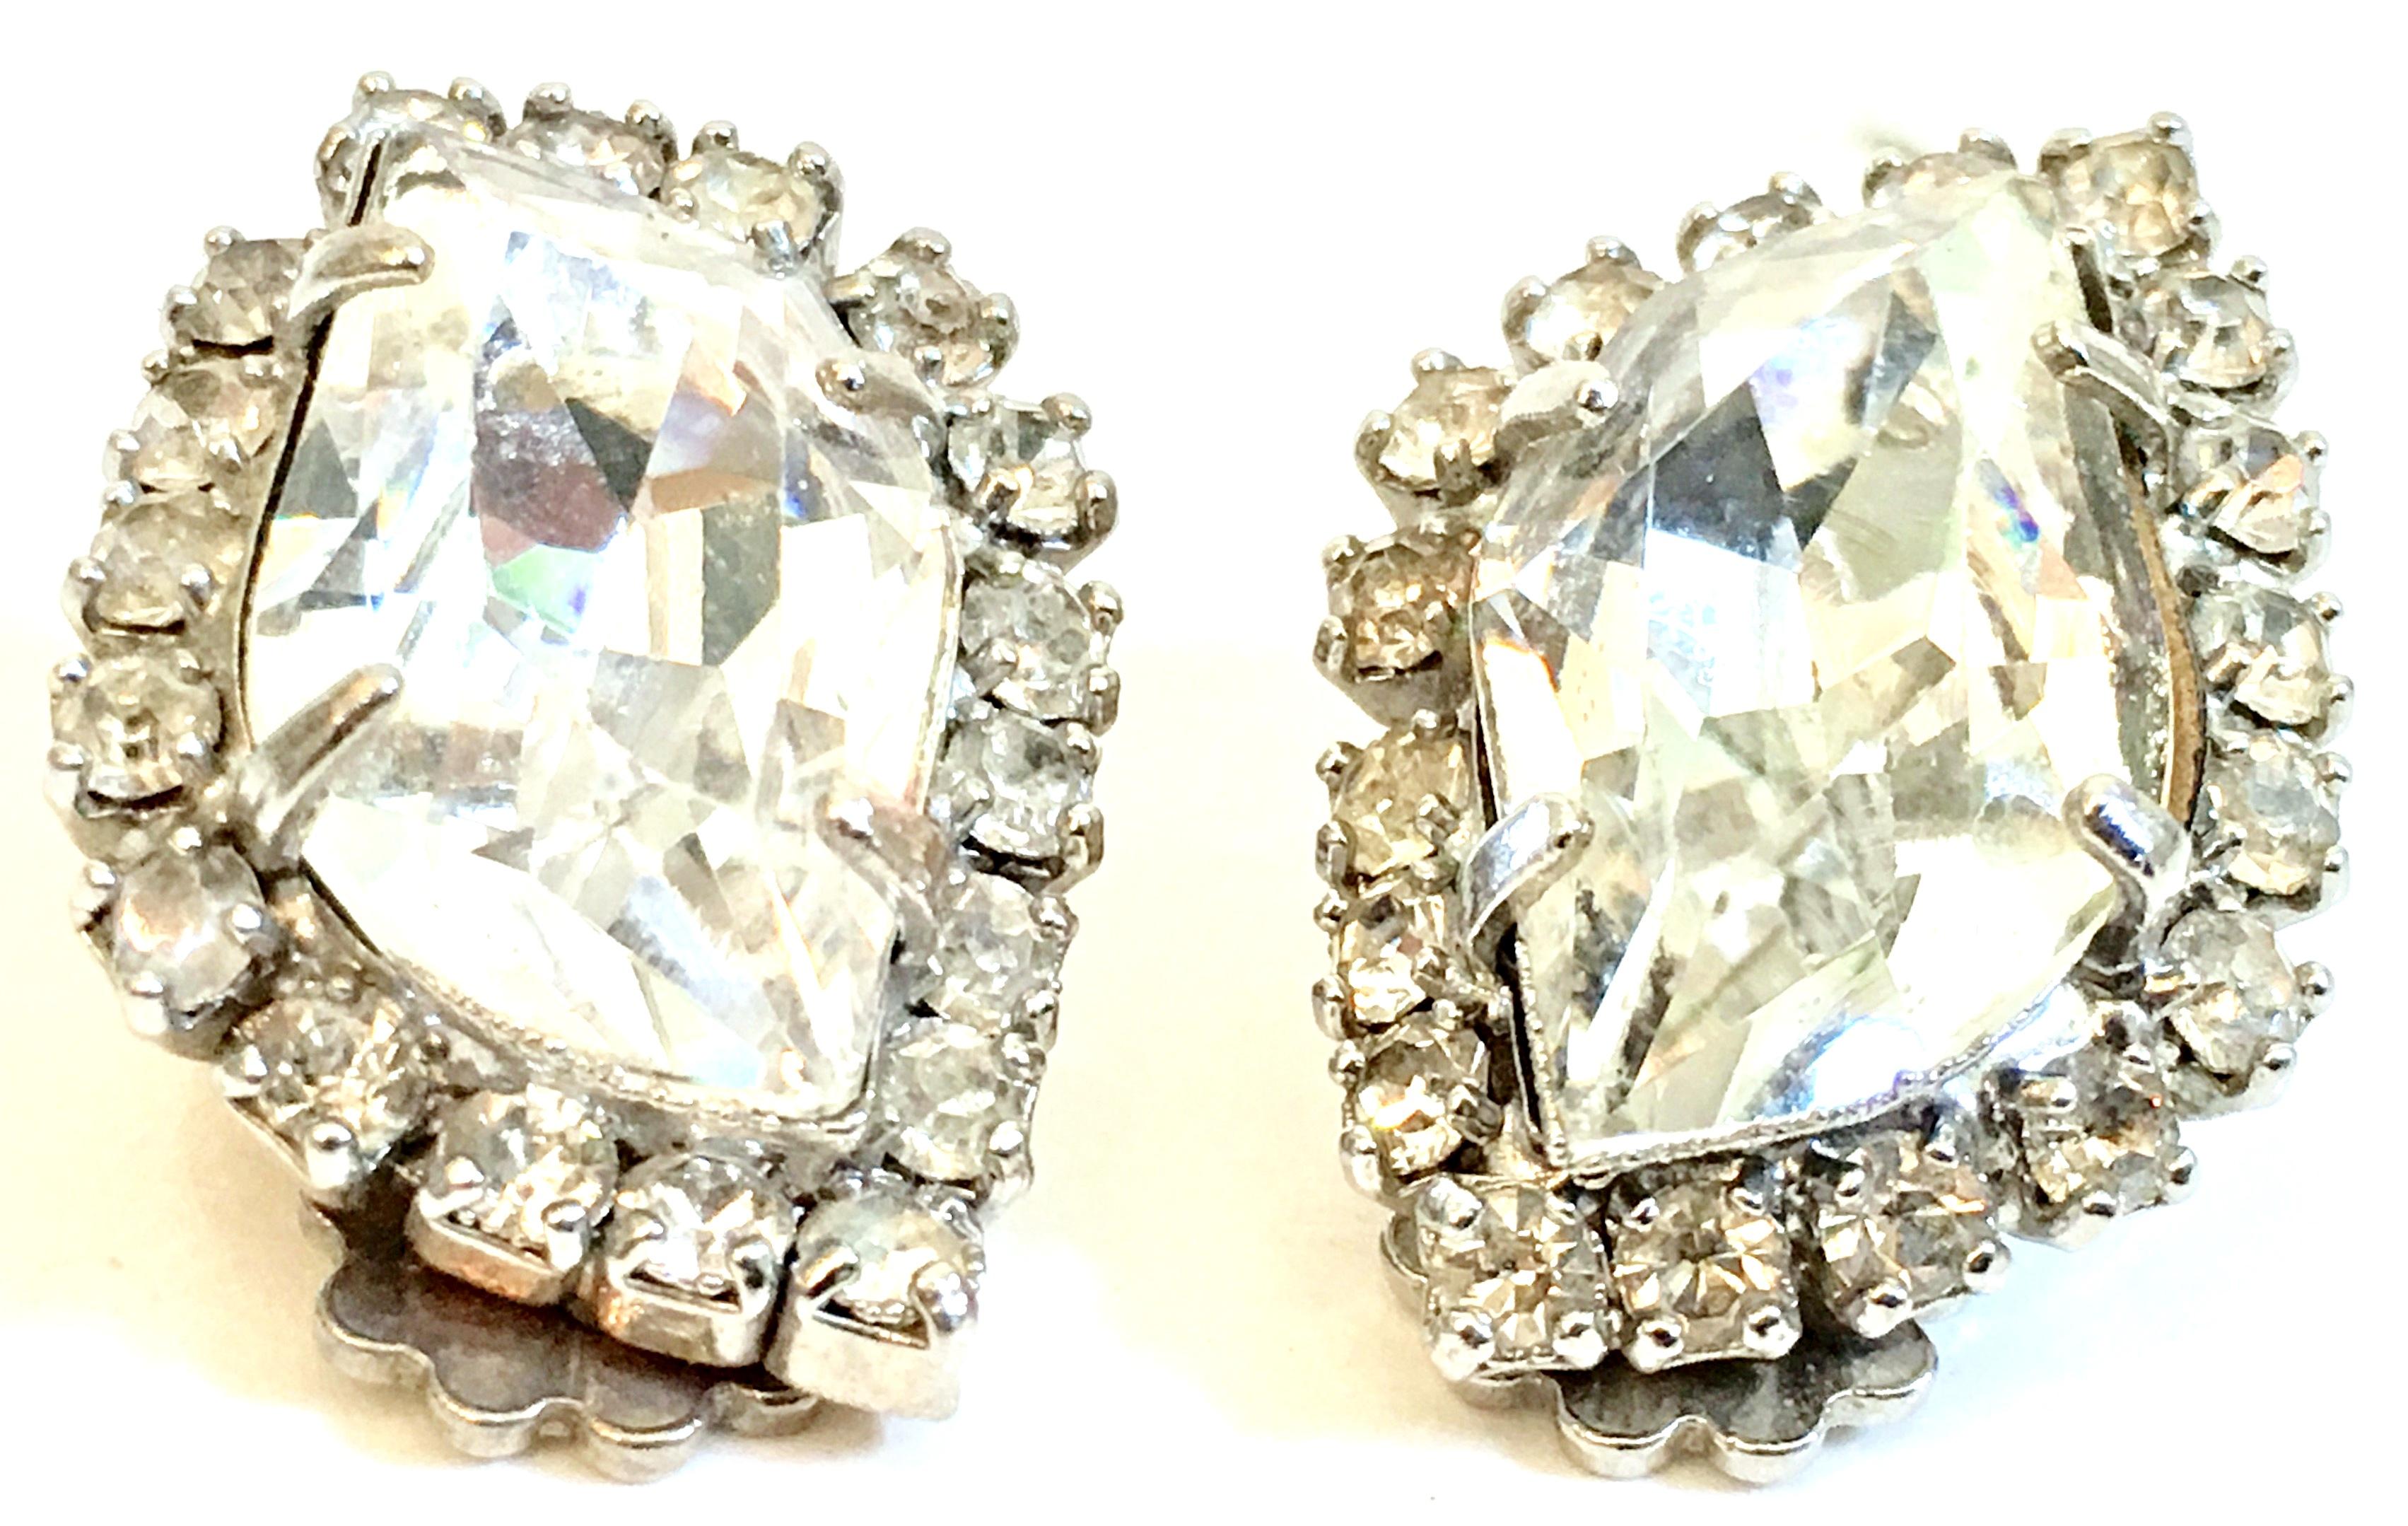 1960'S Silver & Swarovski Crystal Rhinestone Earrings By, Weiss. Features silver rhodium plate and prong set brilliant Swarovski crystal clear large and rare irregular hexagon cut and faceted center stone, surround by round stones
These earrings are